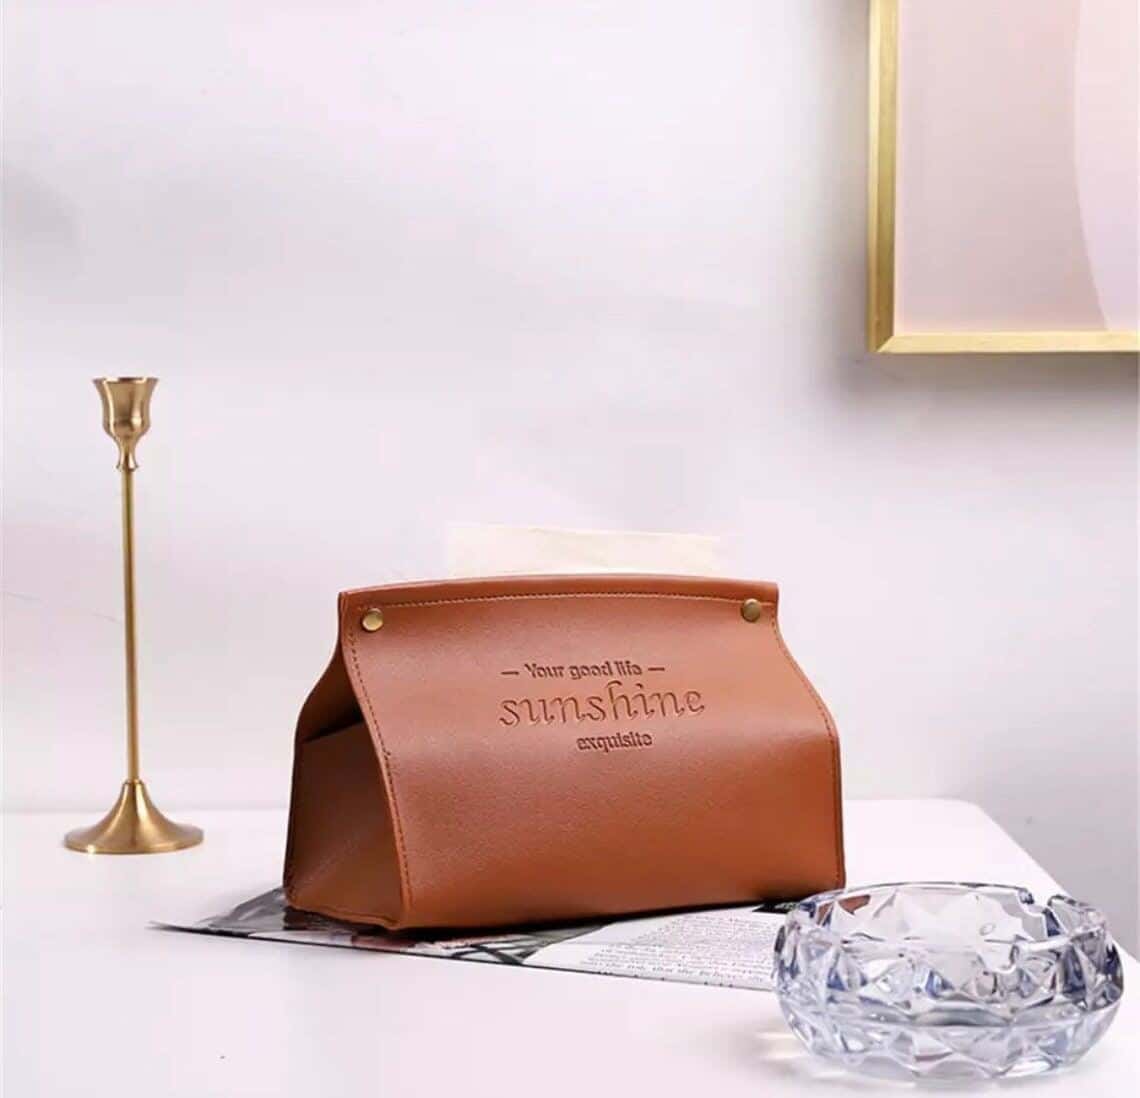 A brown leather pu tissue box on a grey surface with a candle stick nearby